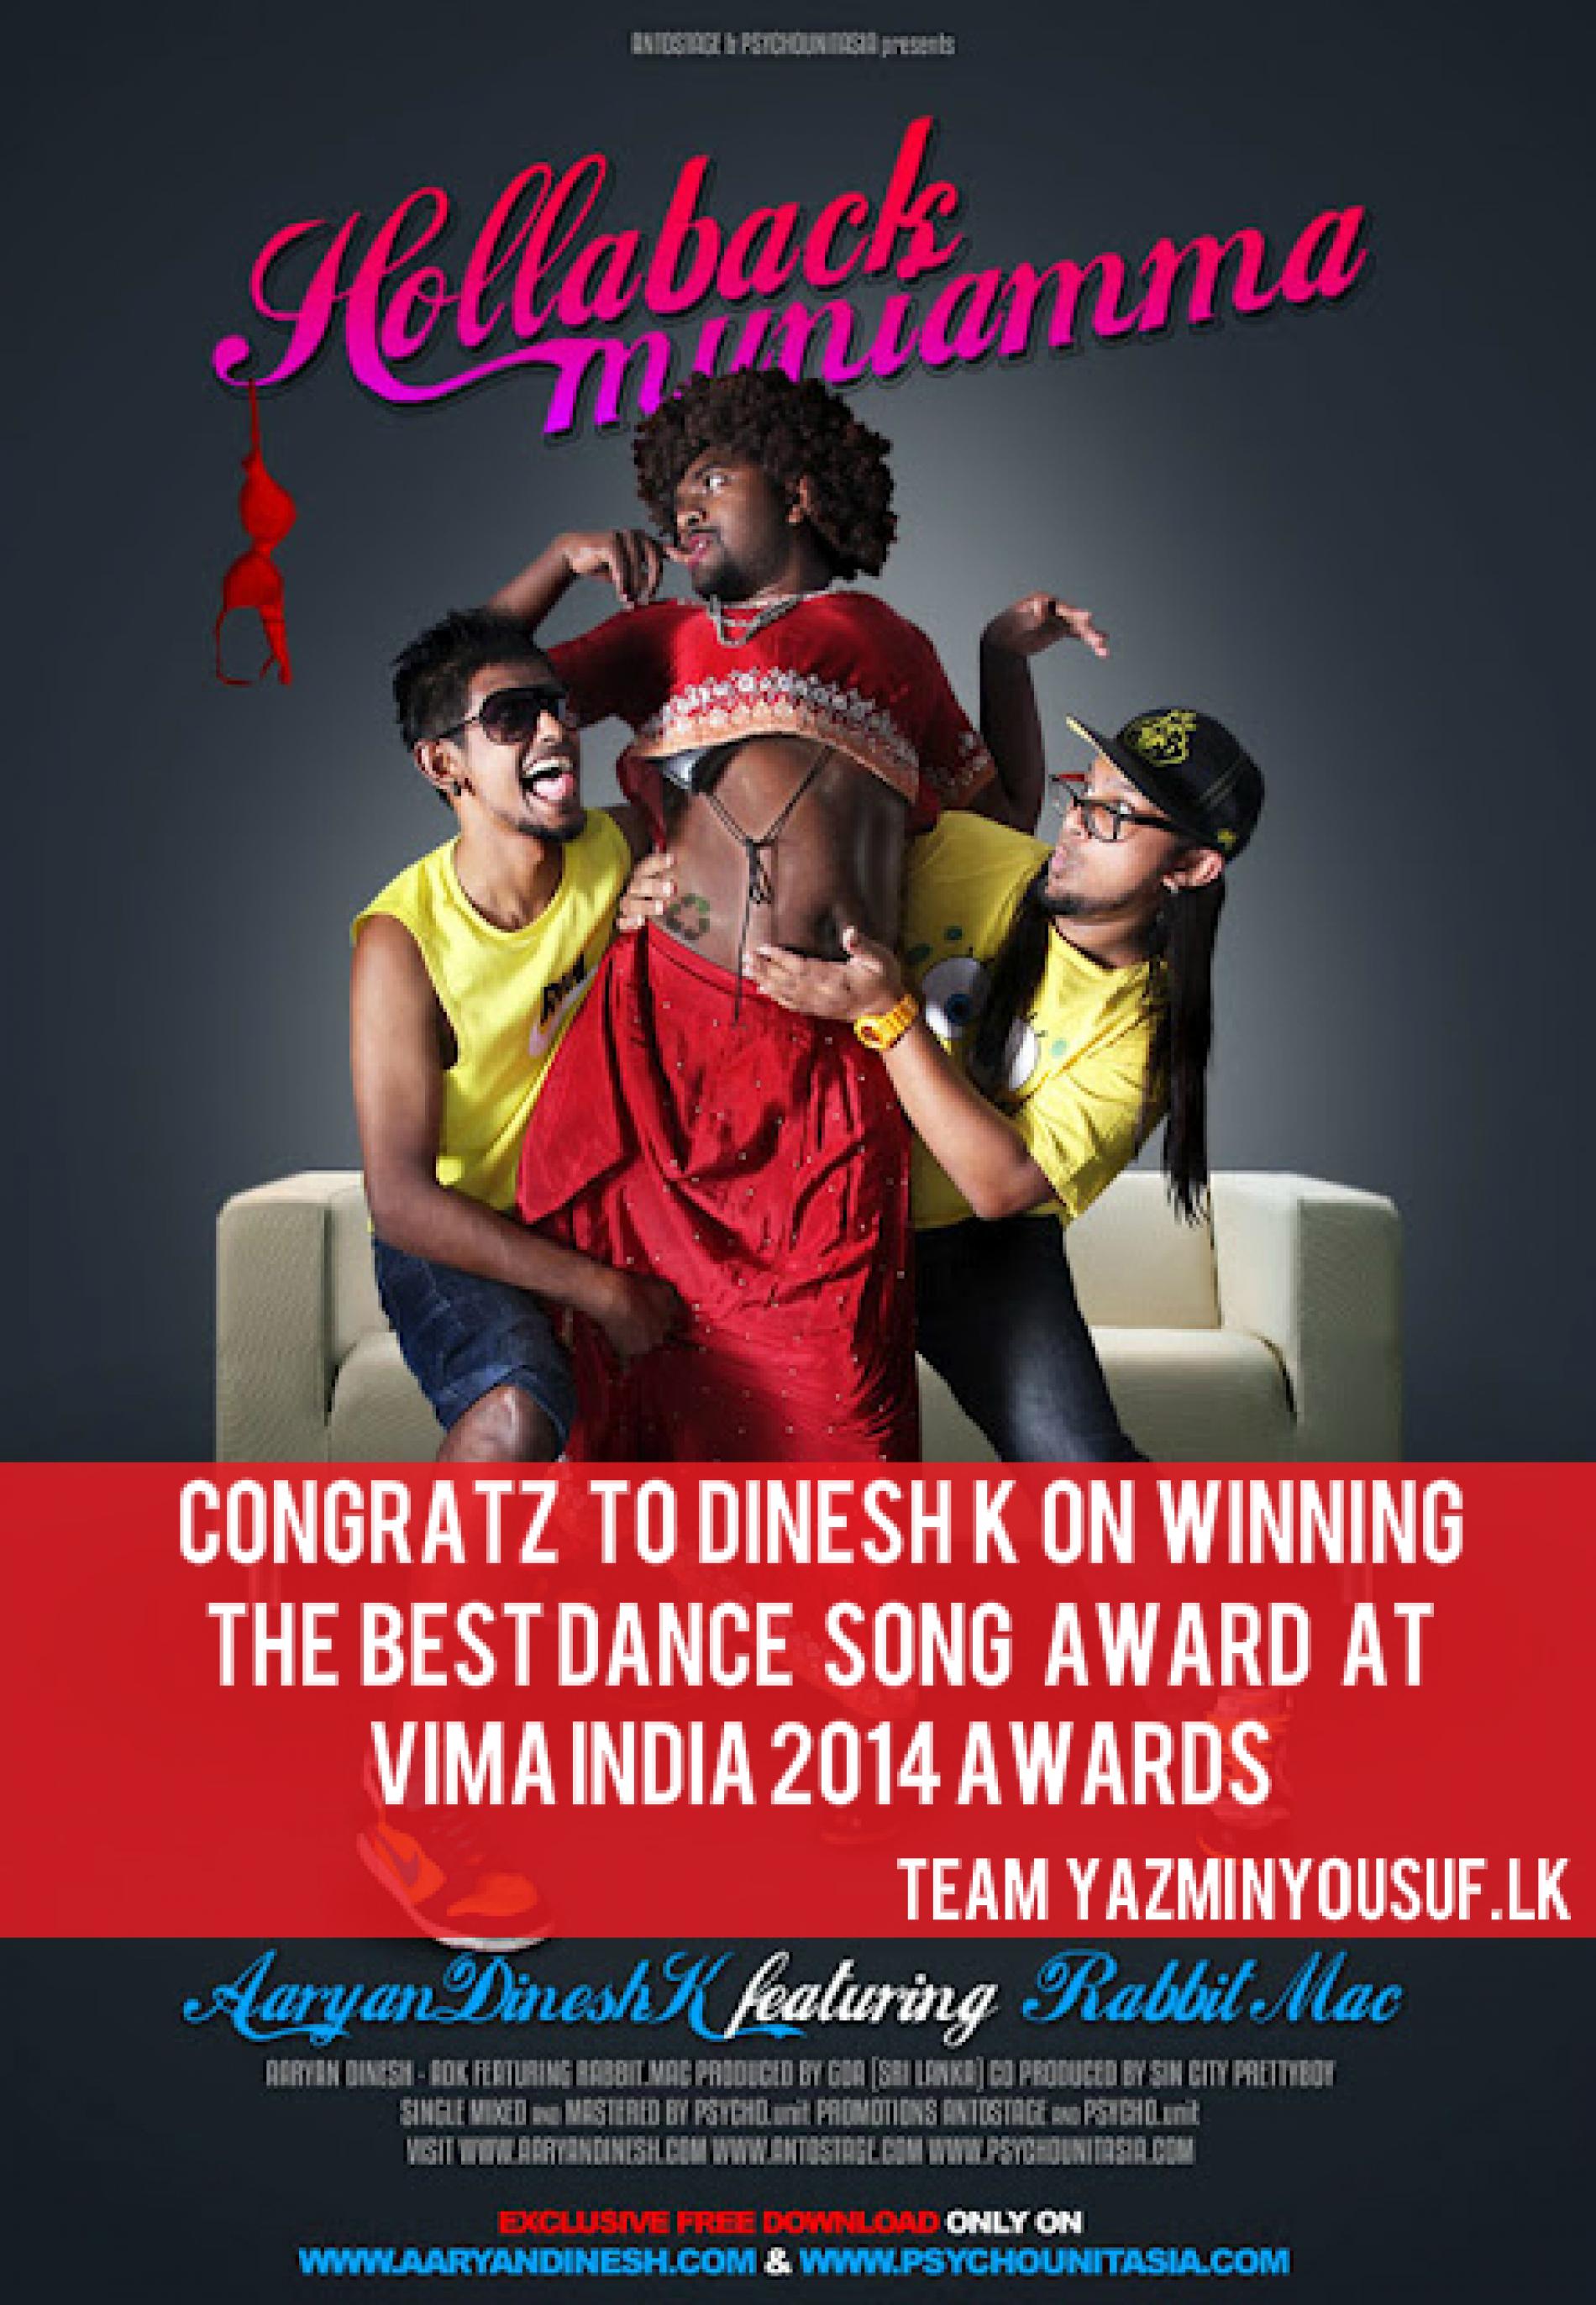 Congratz To Dinesh K On Bagging “The Best Dance Song Award” At VIMA India